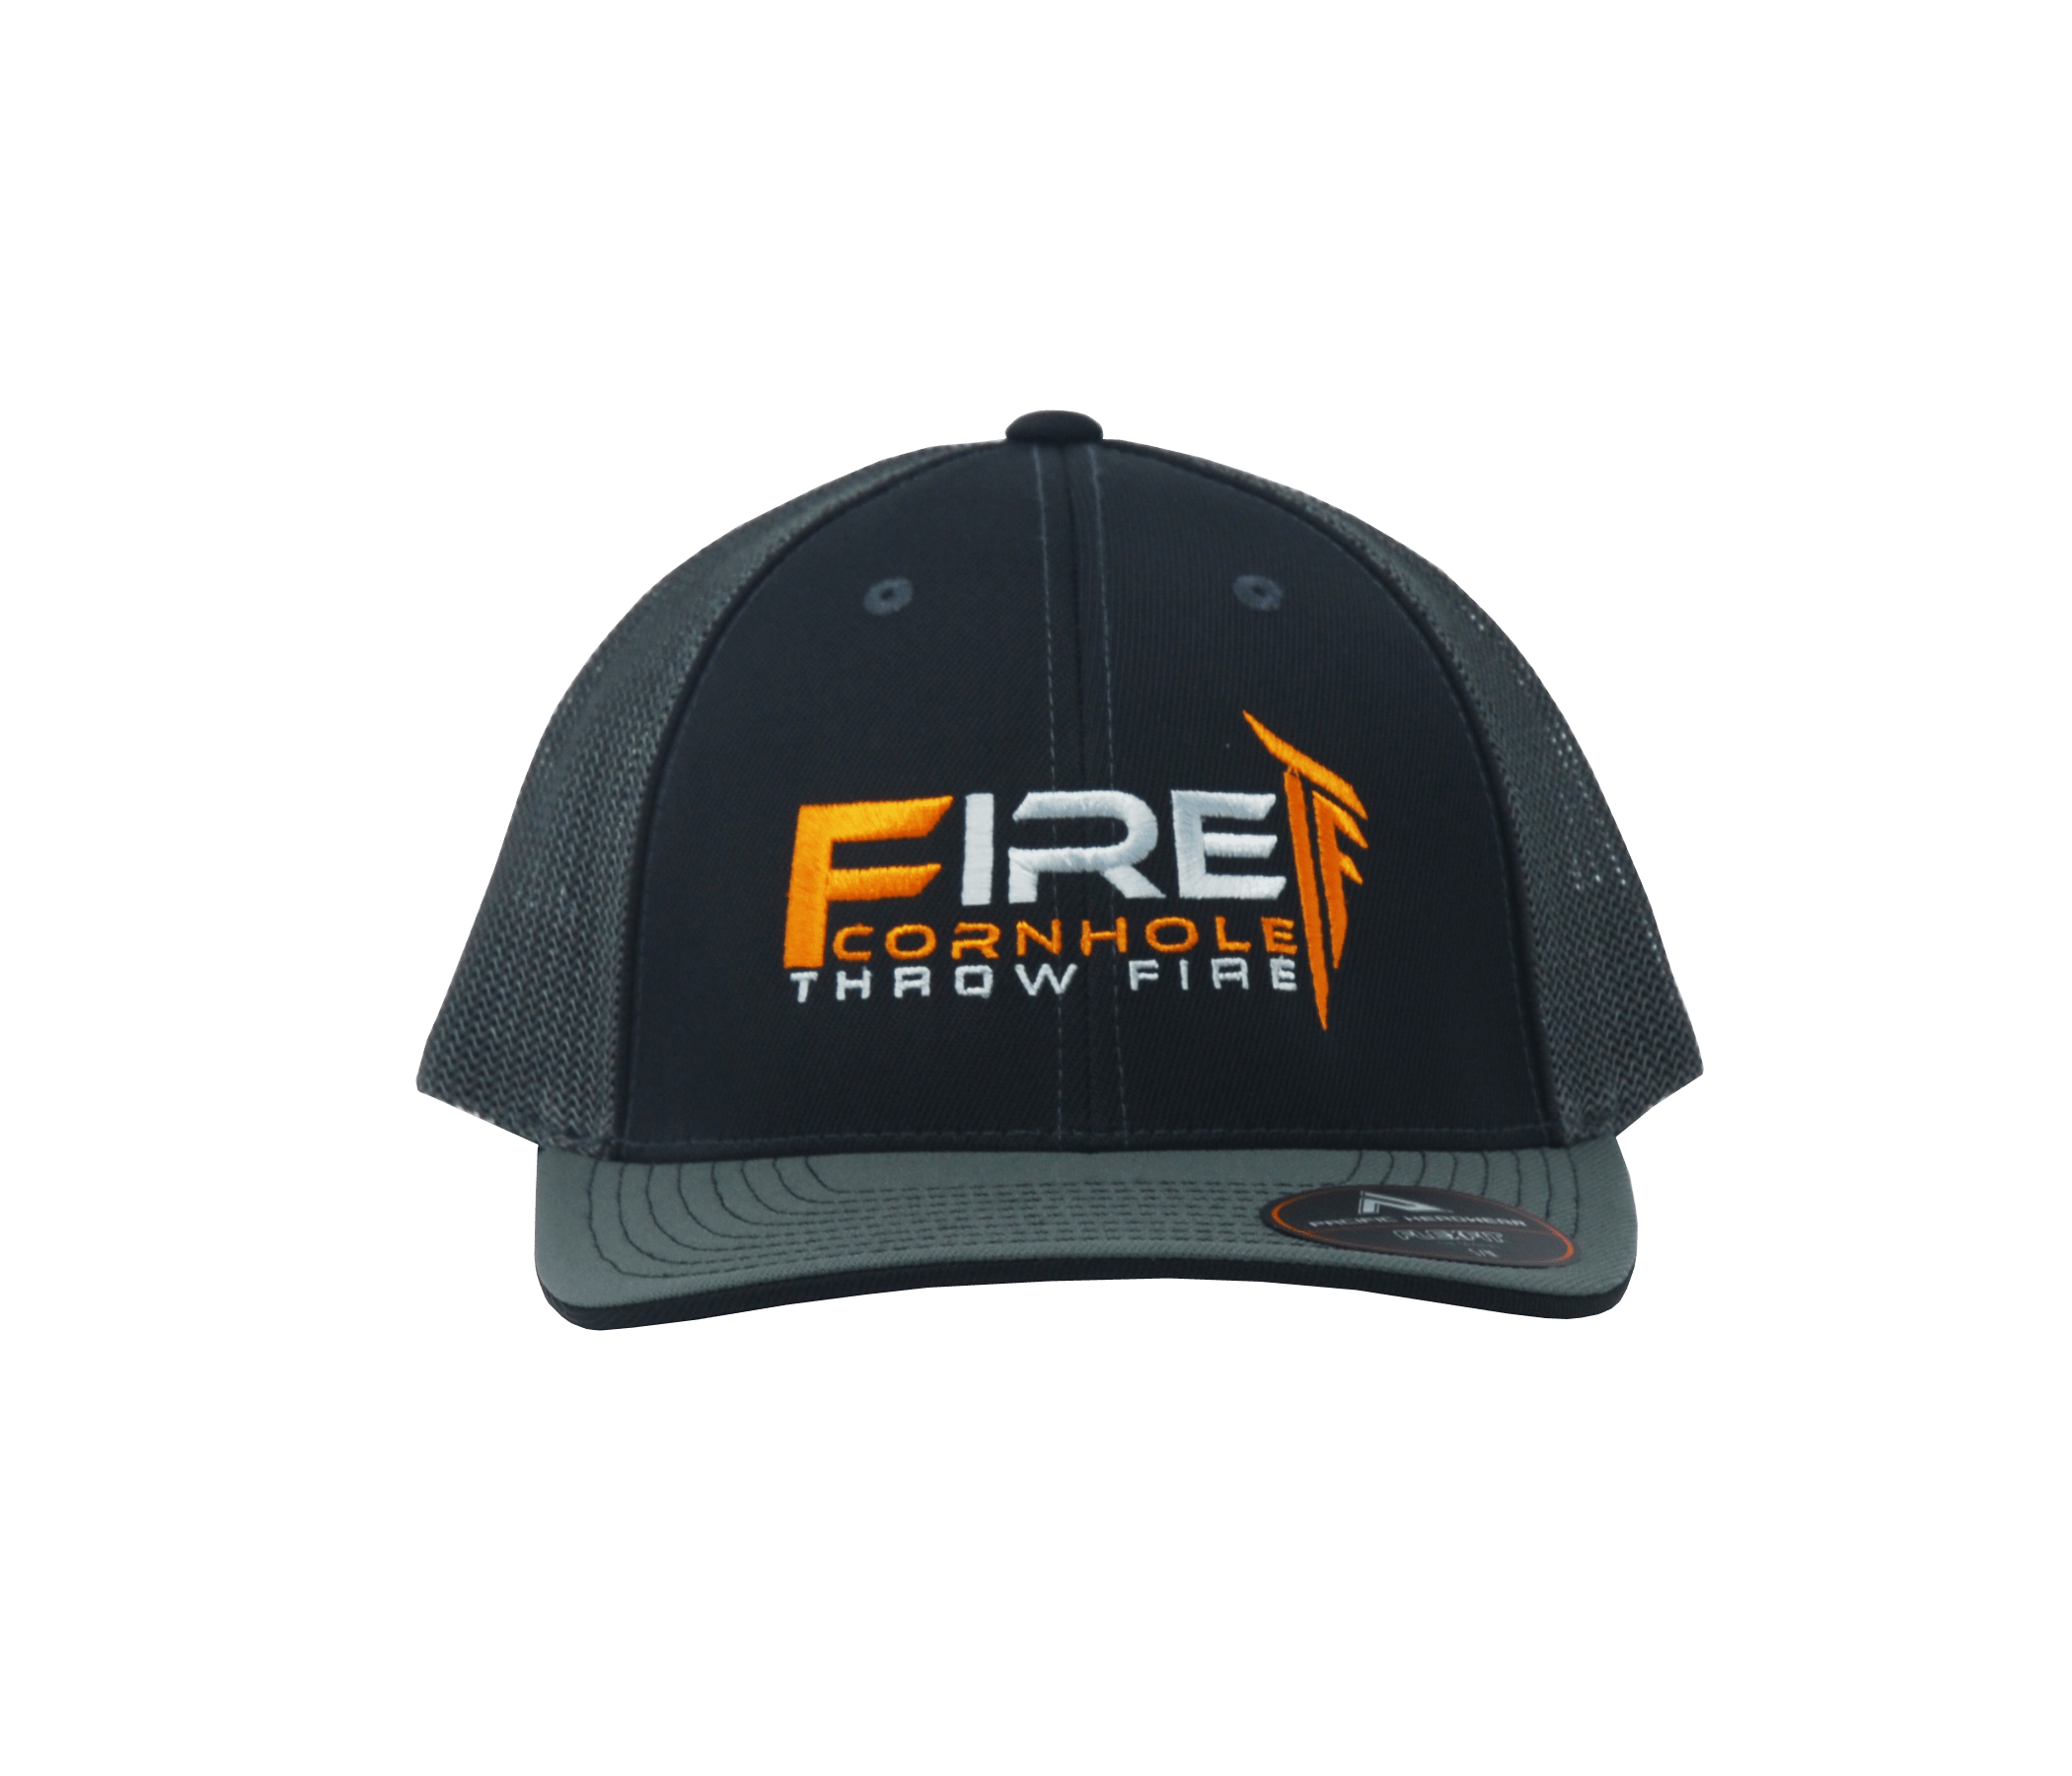 Fire Cornhole Grey and Orange Fitted Hat